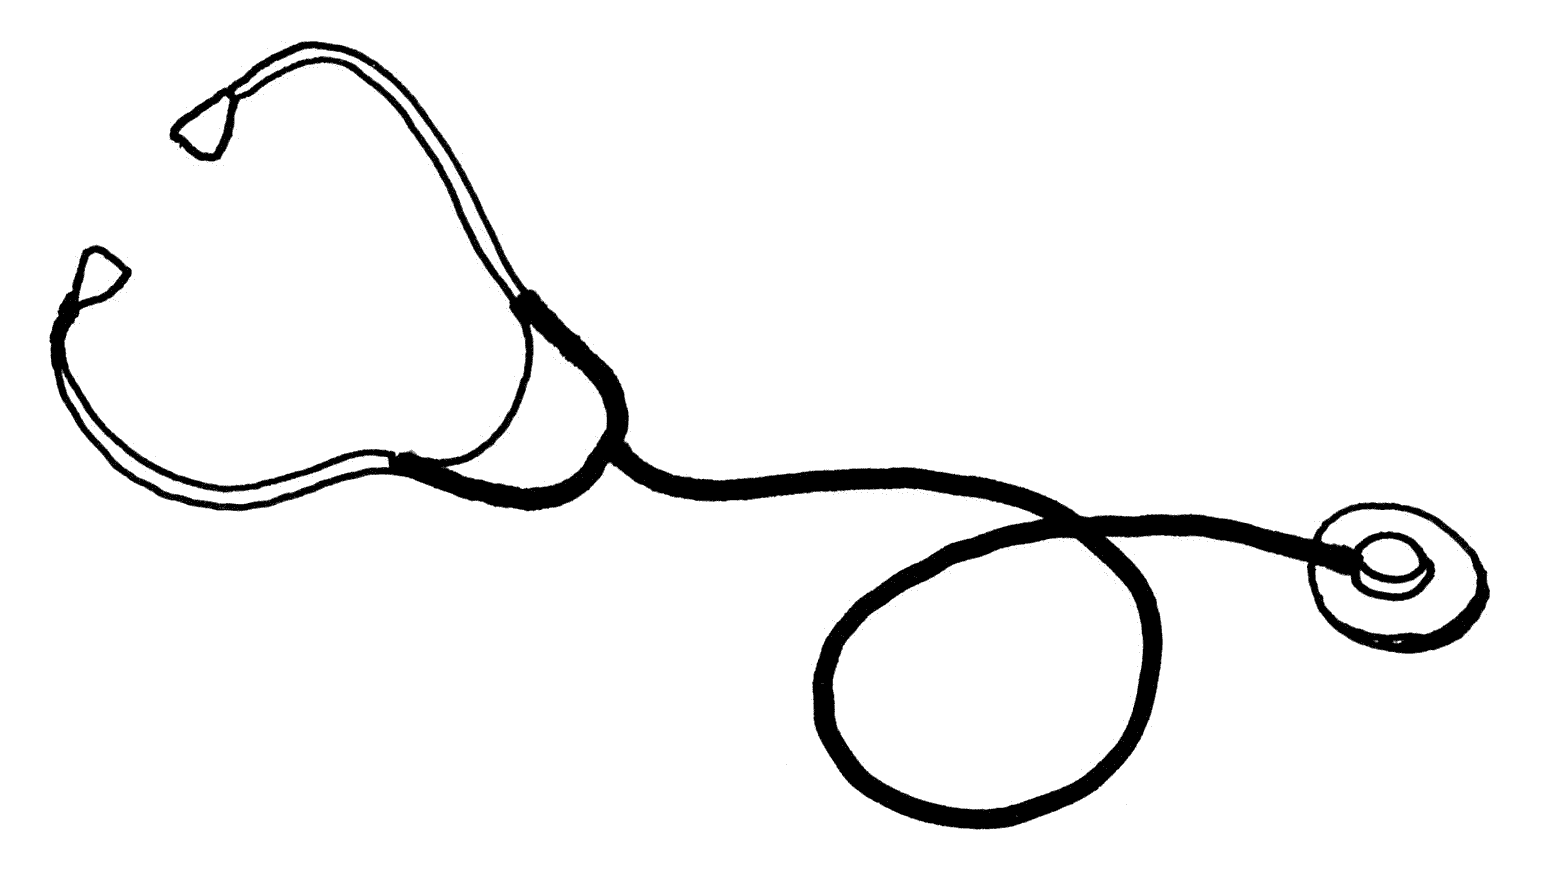 Stethoscope clipart 12